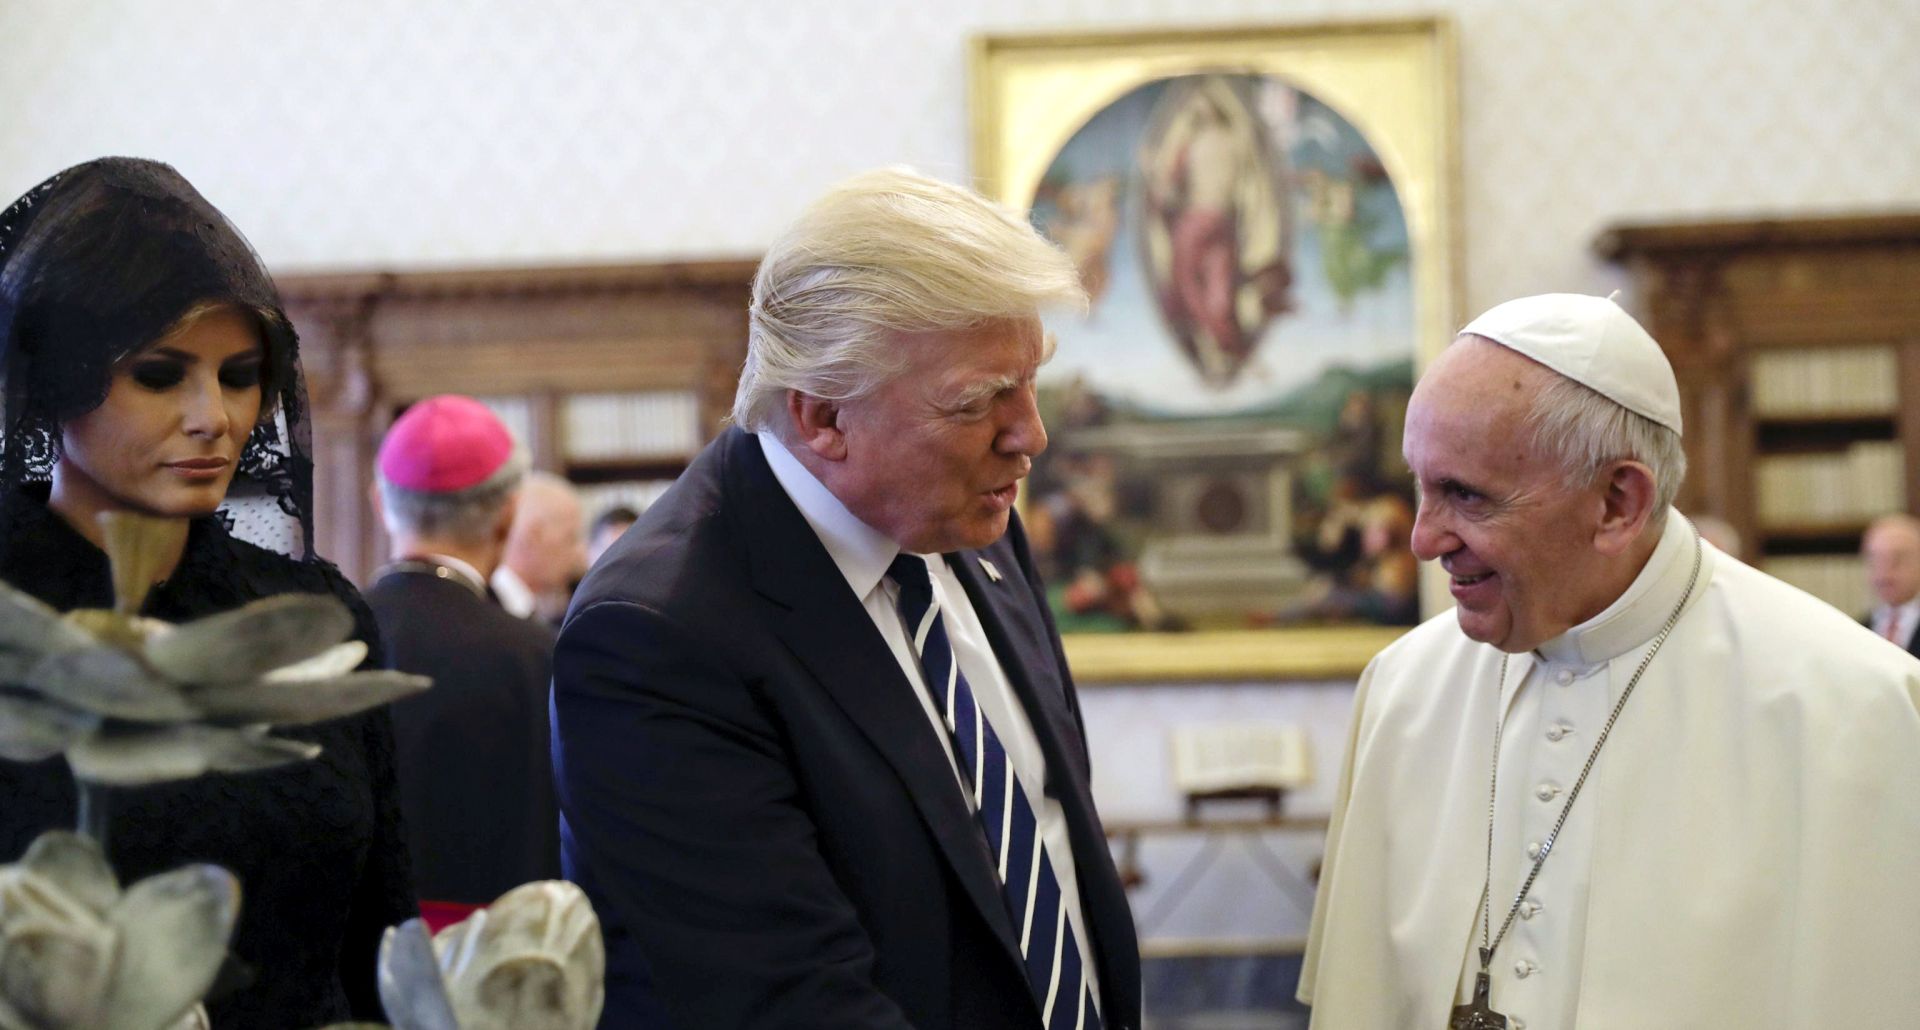 epa05985484 Pope Francis (R) meets with US President Donald J. Trump (C) and US First Lady Melania Trump (L) in Vatican City, 24 May 2017. Trump is in Italy on a two day visit, including a meeting with Pope Francis at the Vatican, ahead of his participation in a NATO summit in Brussels on 25 May.  EPA/ALESSANDRA TARANTINO / POOL